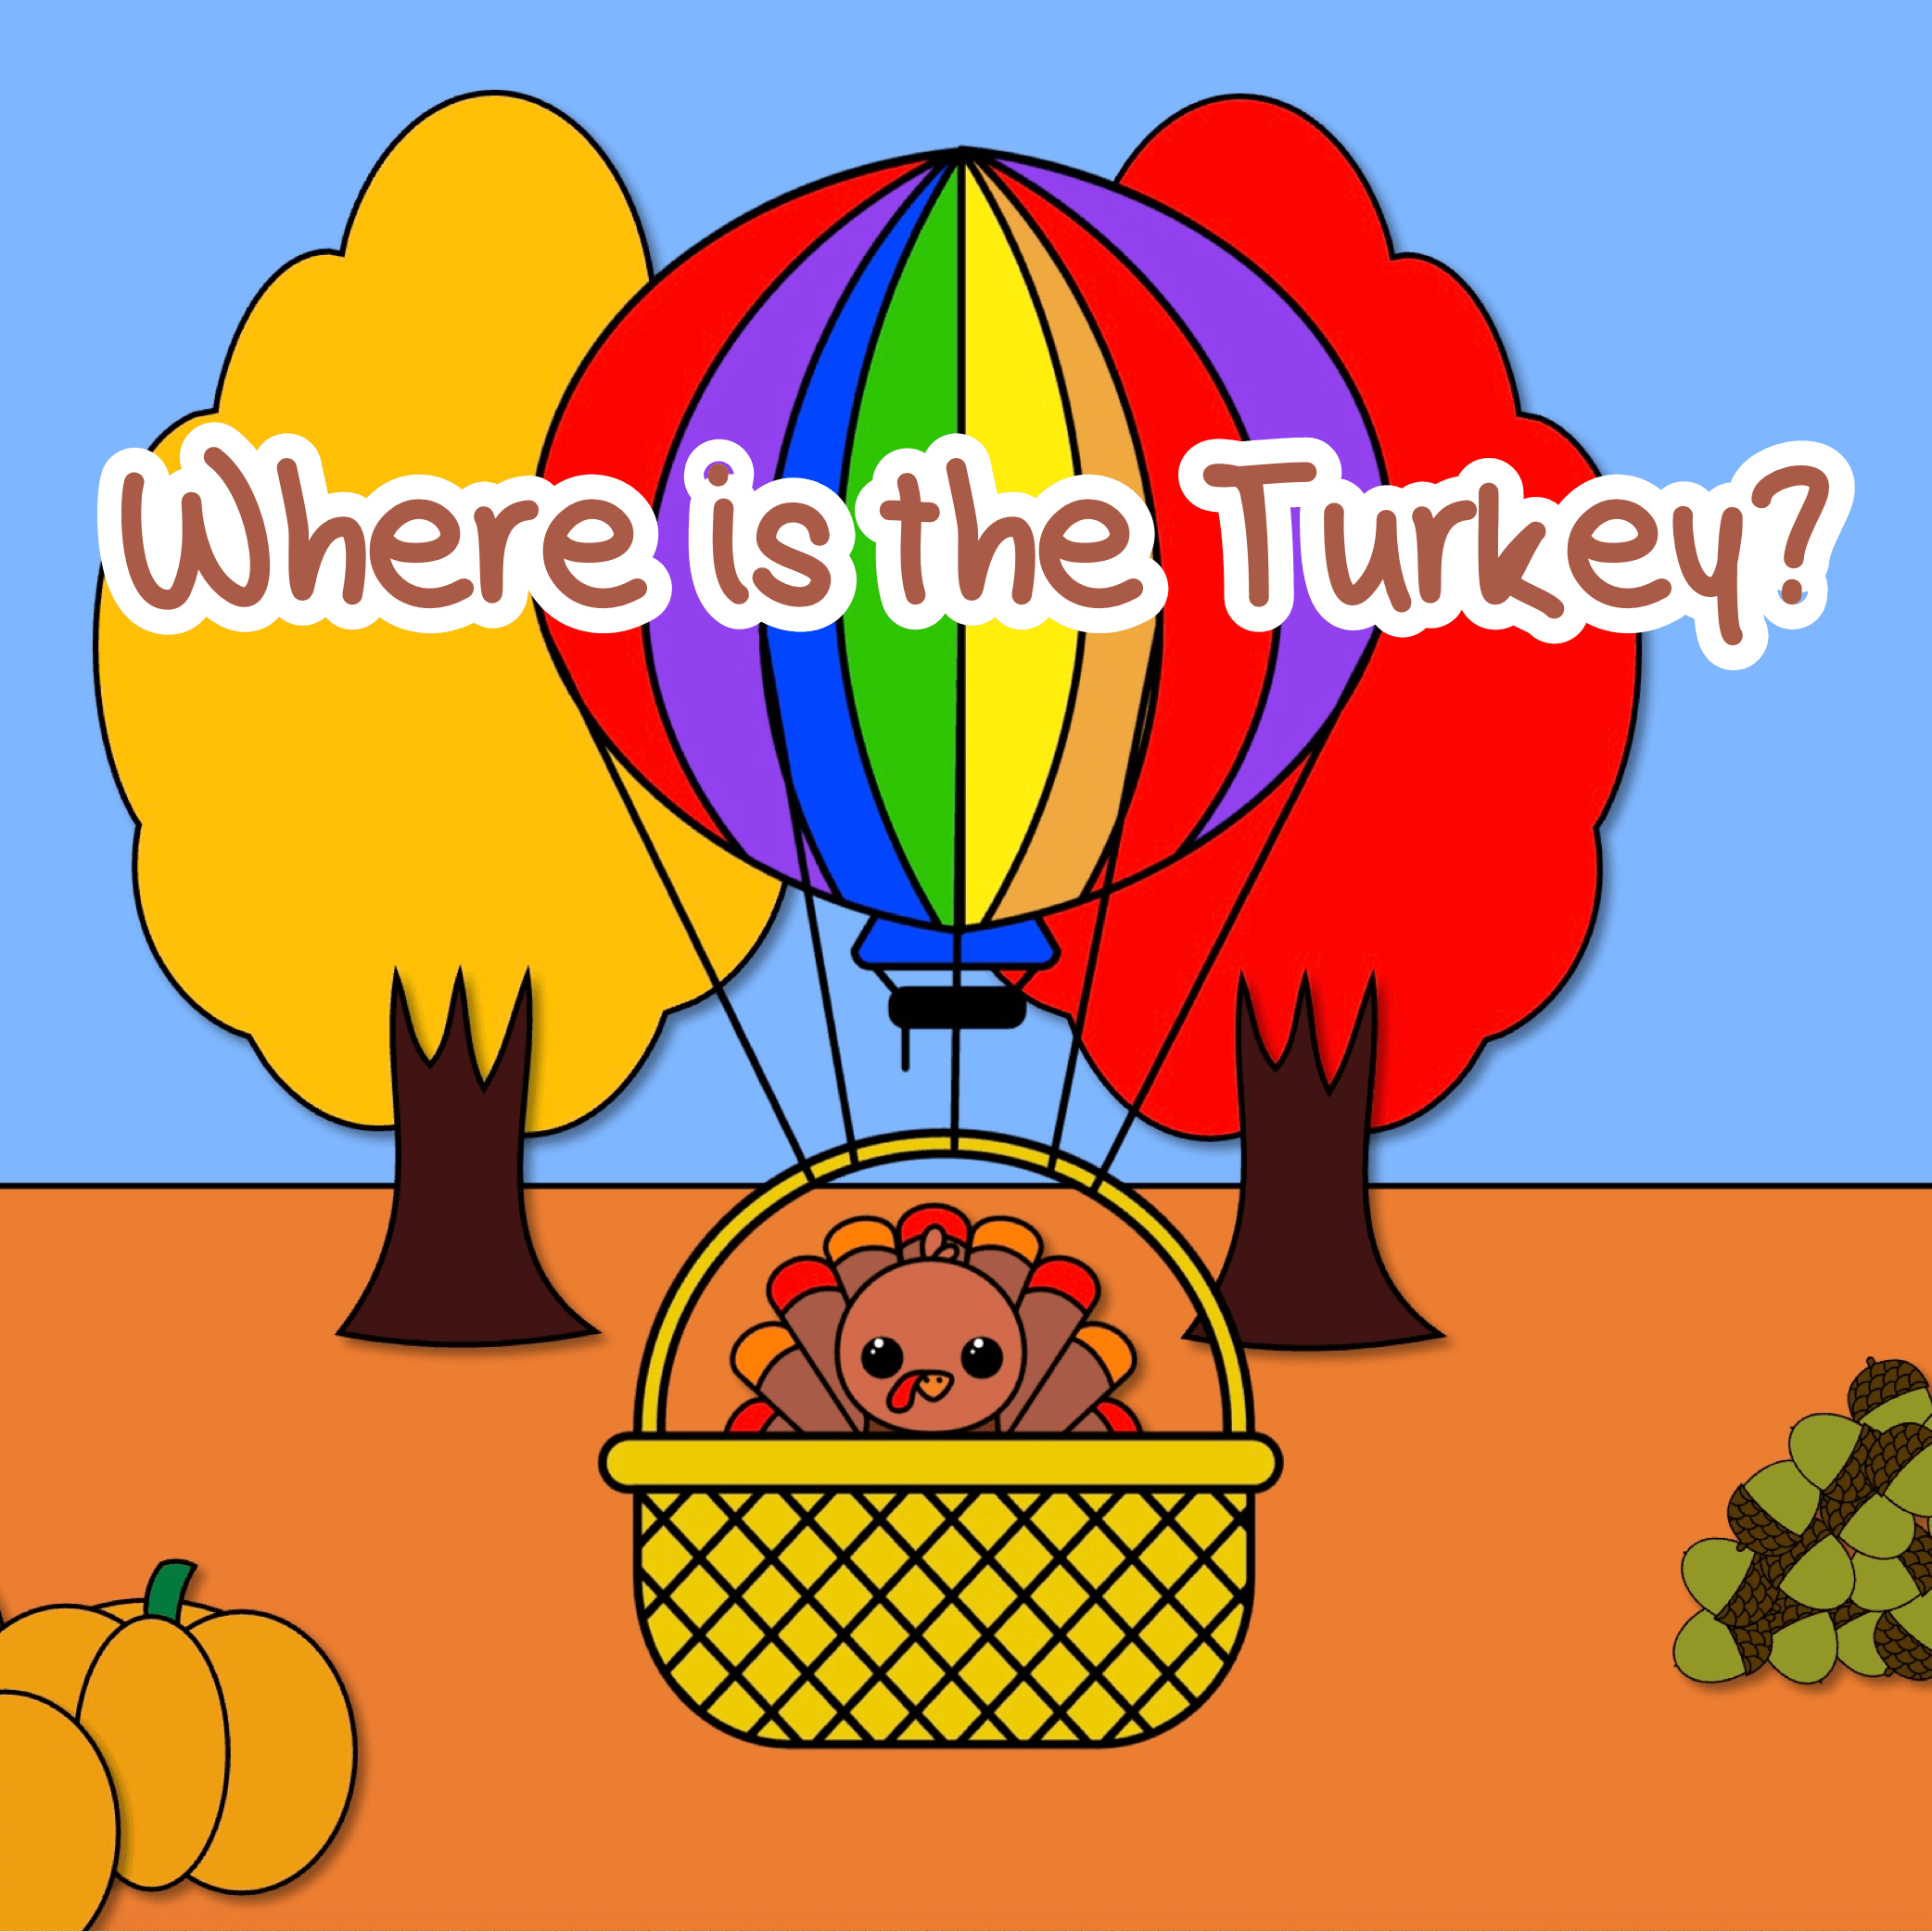 Where is the Turkey?